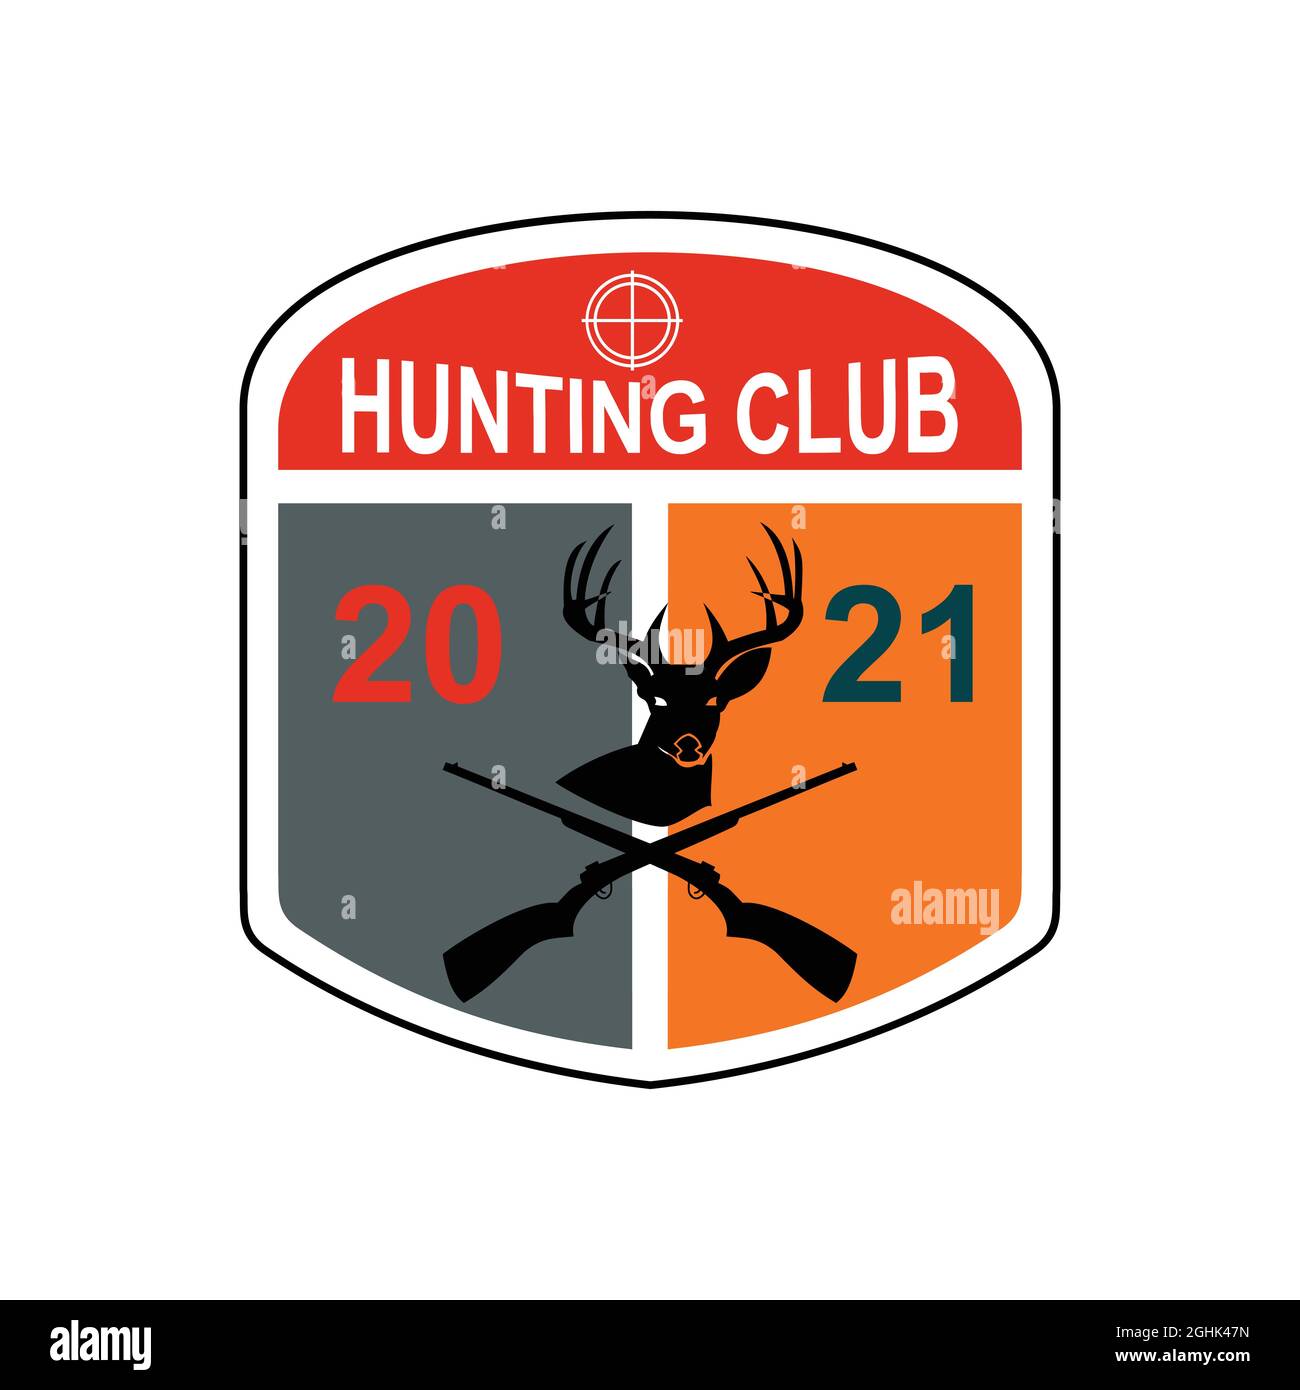 hunting season logo design that can be customized with the club name according to your needs Stock Vector